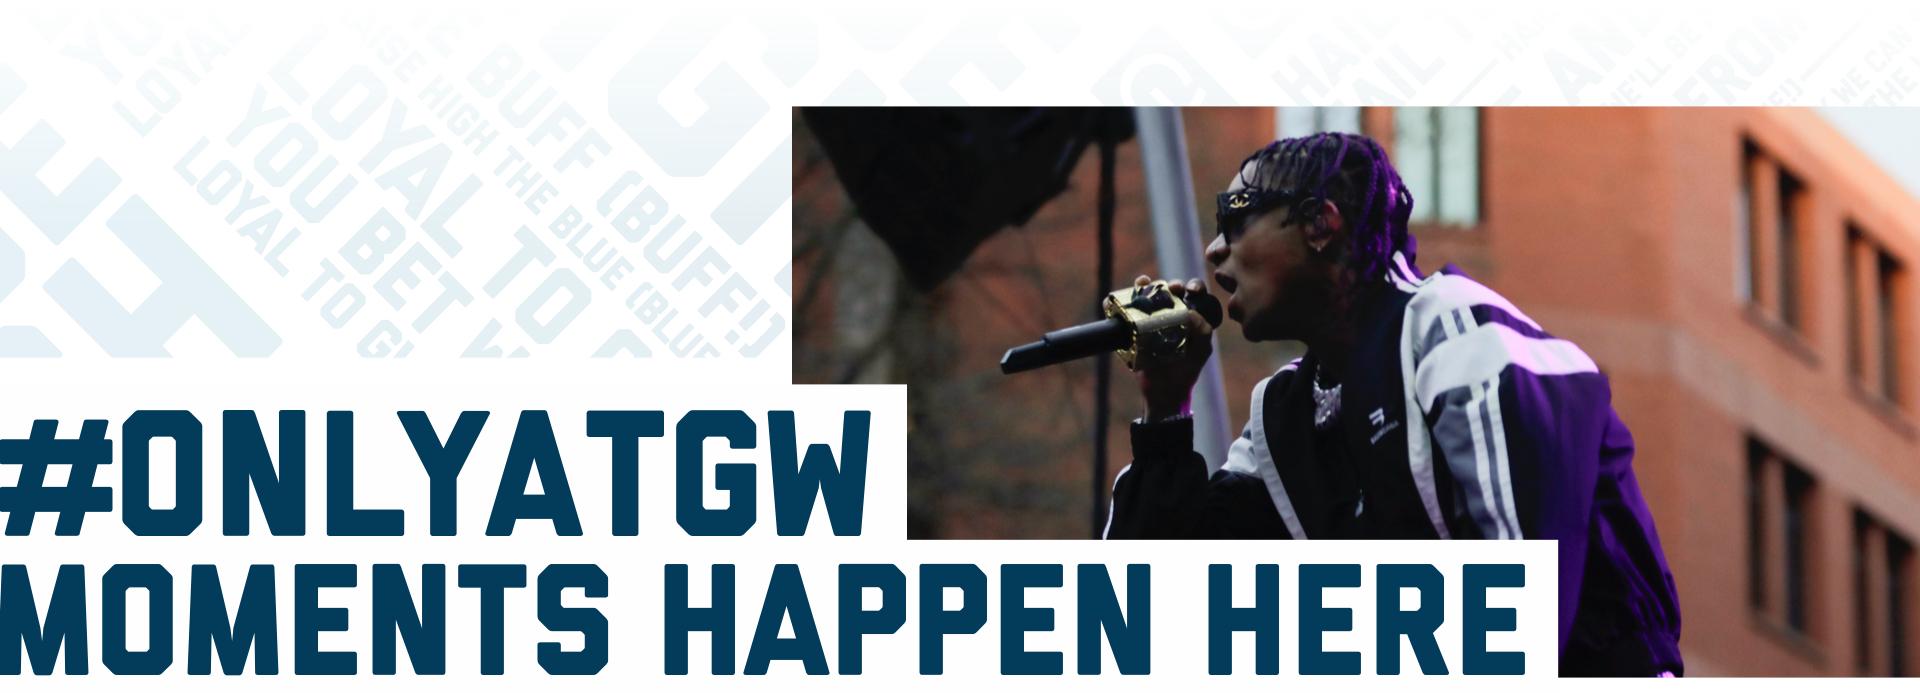 Text: "#ONLYATGW moments happen here" over an image of a singer at a GW event